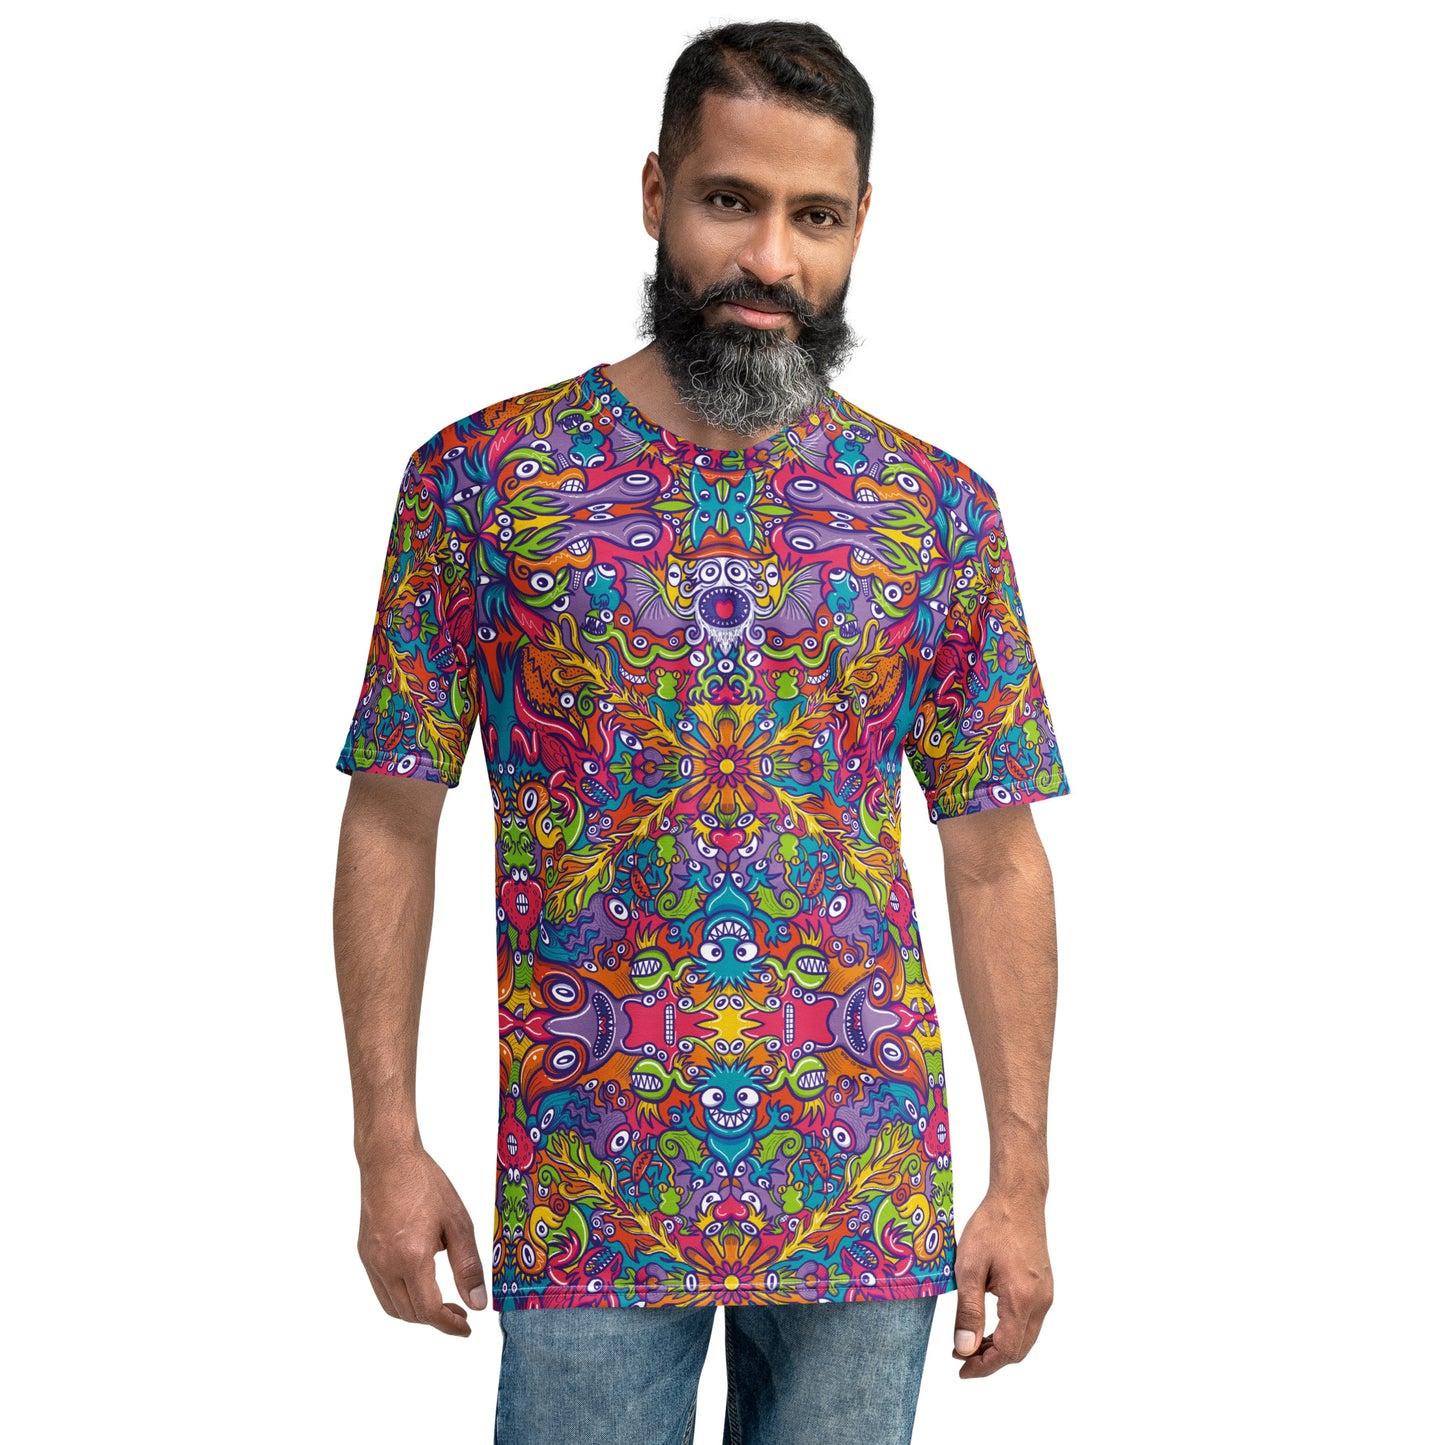 The Wizard's Dream: Shaping a New Generation of Doodle Creatures - Men's t-shirt. Front view